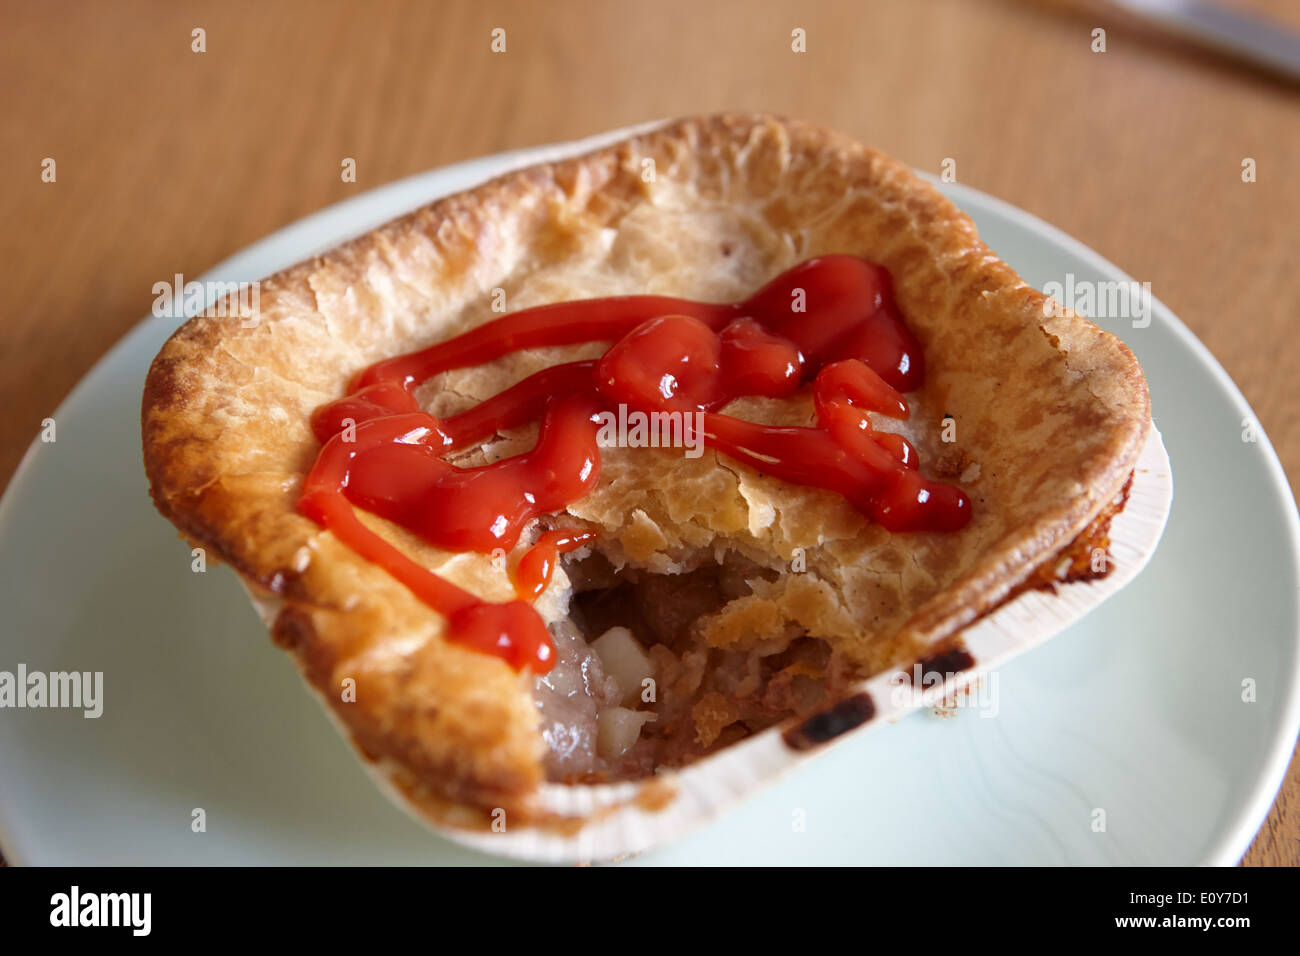 baked scouse pie in carton covered in tomato sauce Stock Photo